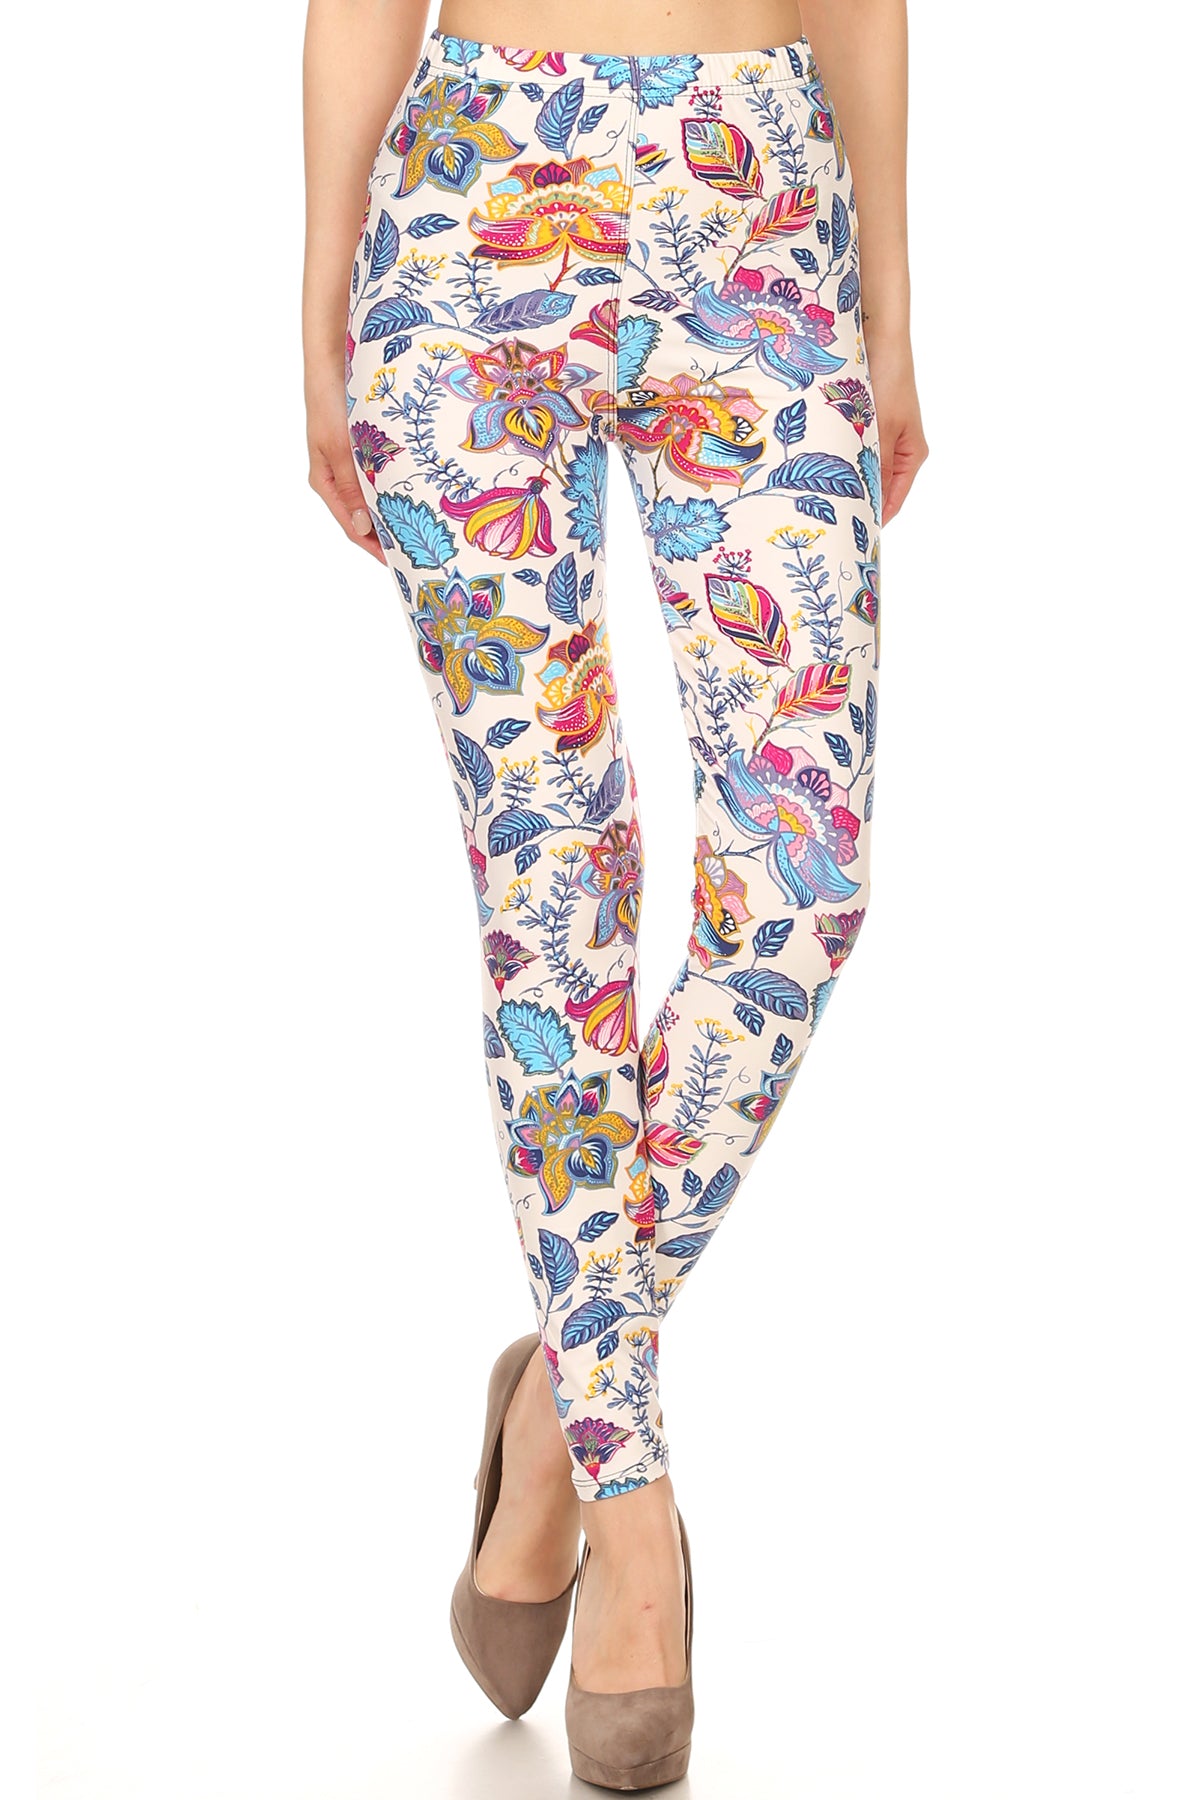 Floral Printed Lined Knit Legging With Elastic Waistband - K I T S H O P 